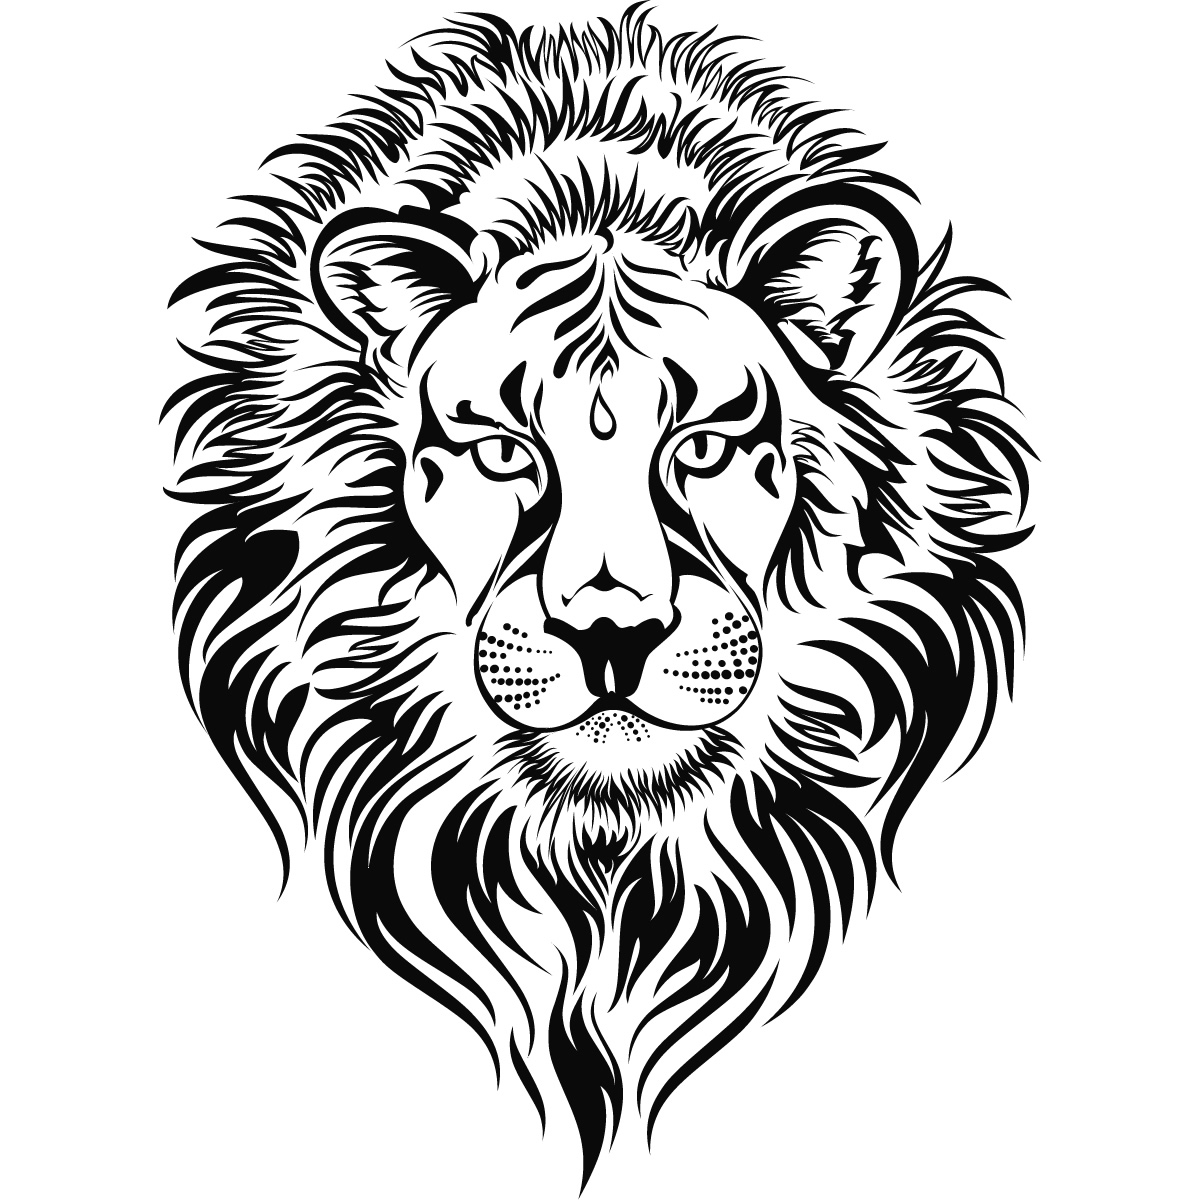 Hand Drawn Lion Head Vector Sketch Isolated On White Background Vintage  Etching Illustration Stock Illustration - Download Image Now - iStock